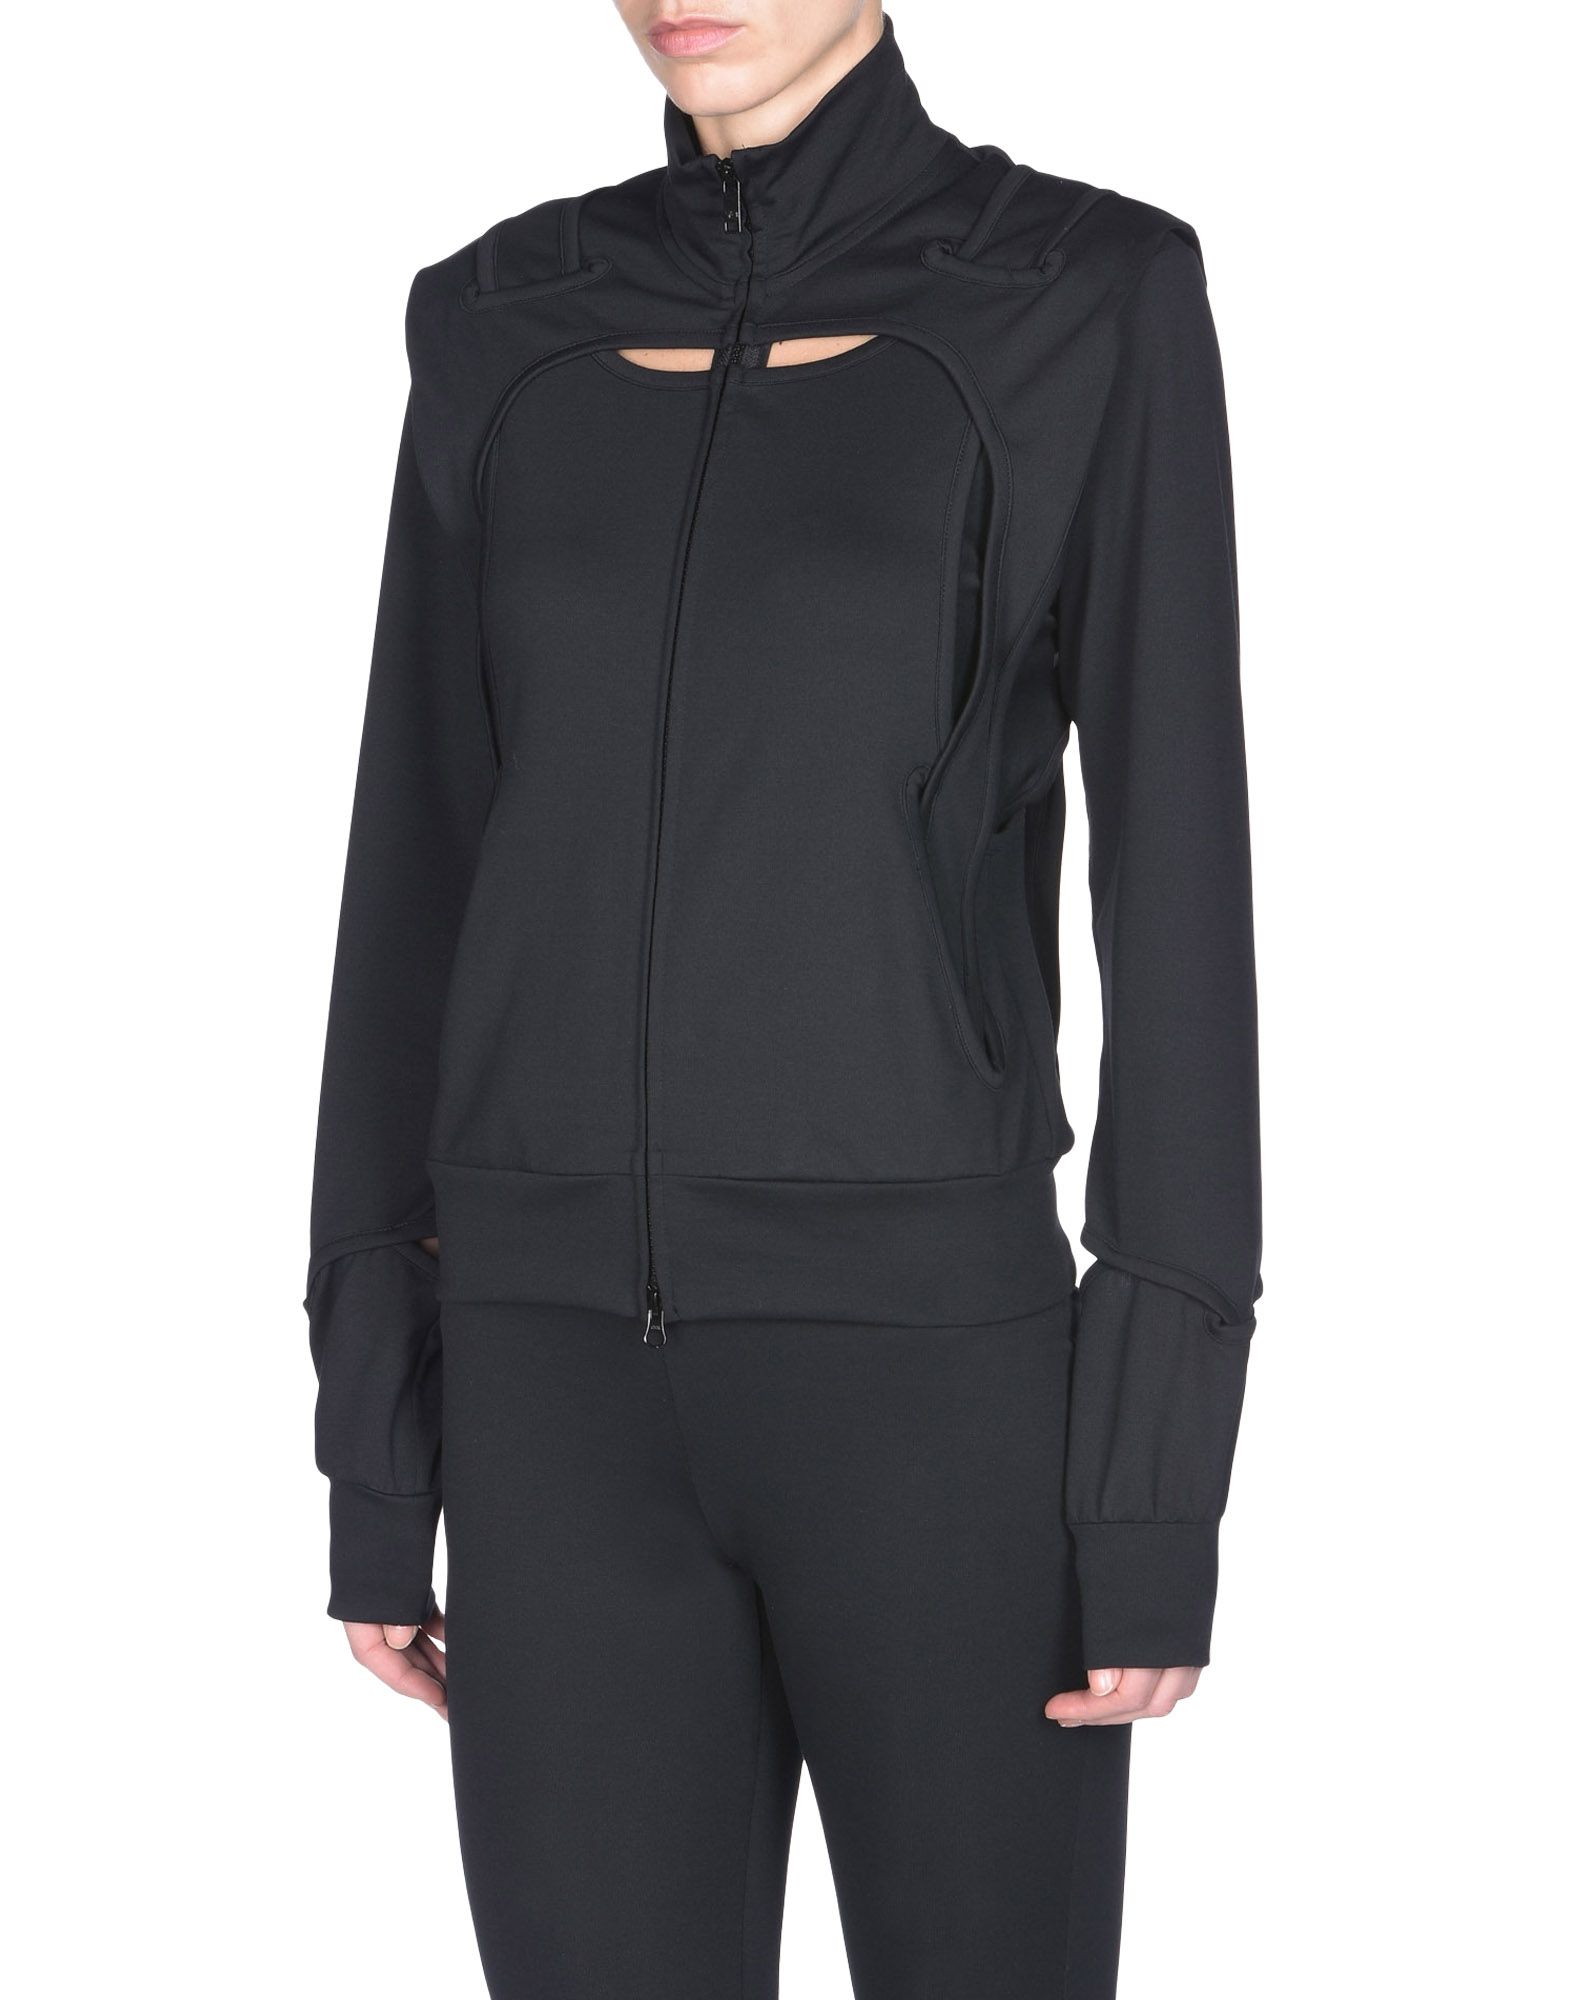 Y 3 LUX HOODIE for Women | Adidas Y-3 Official Store